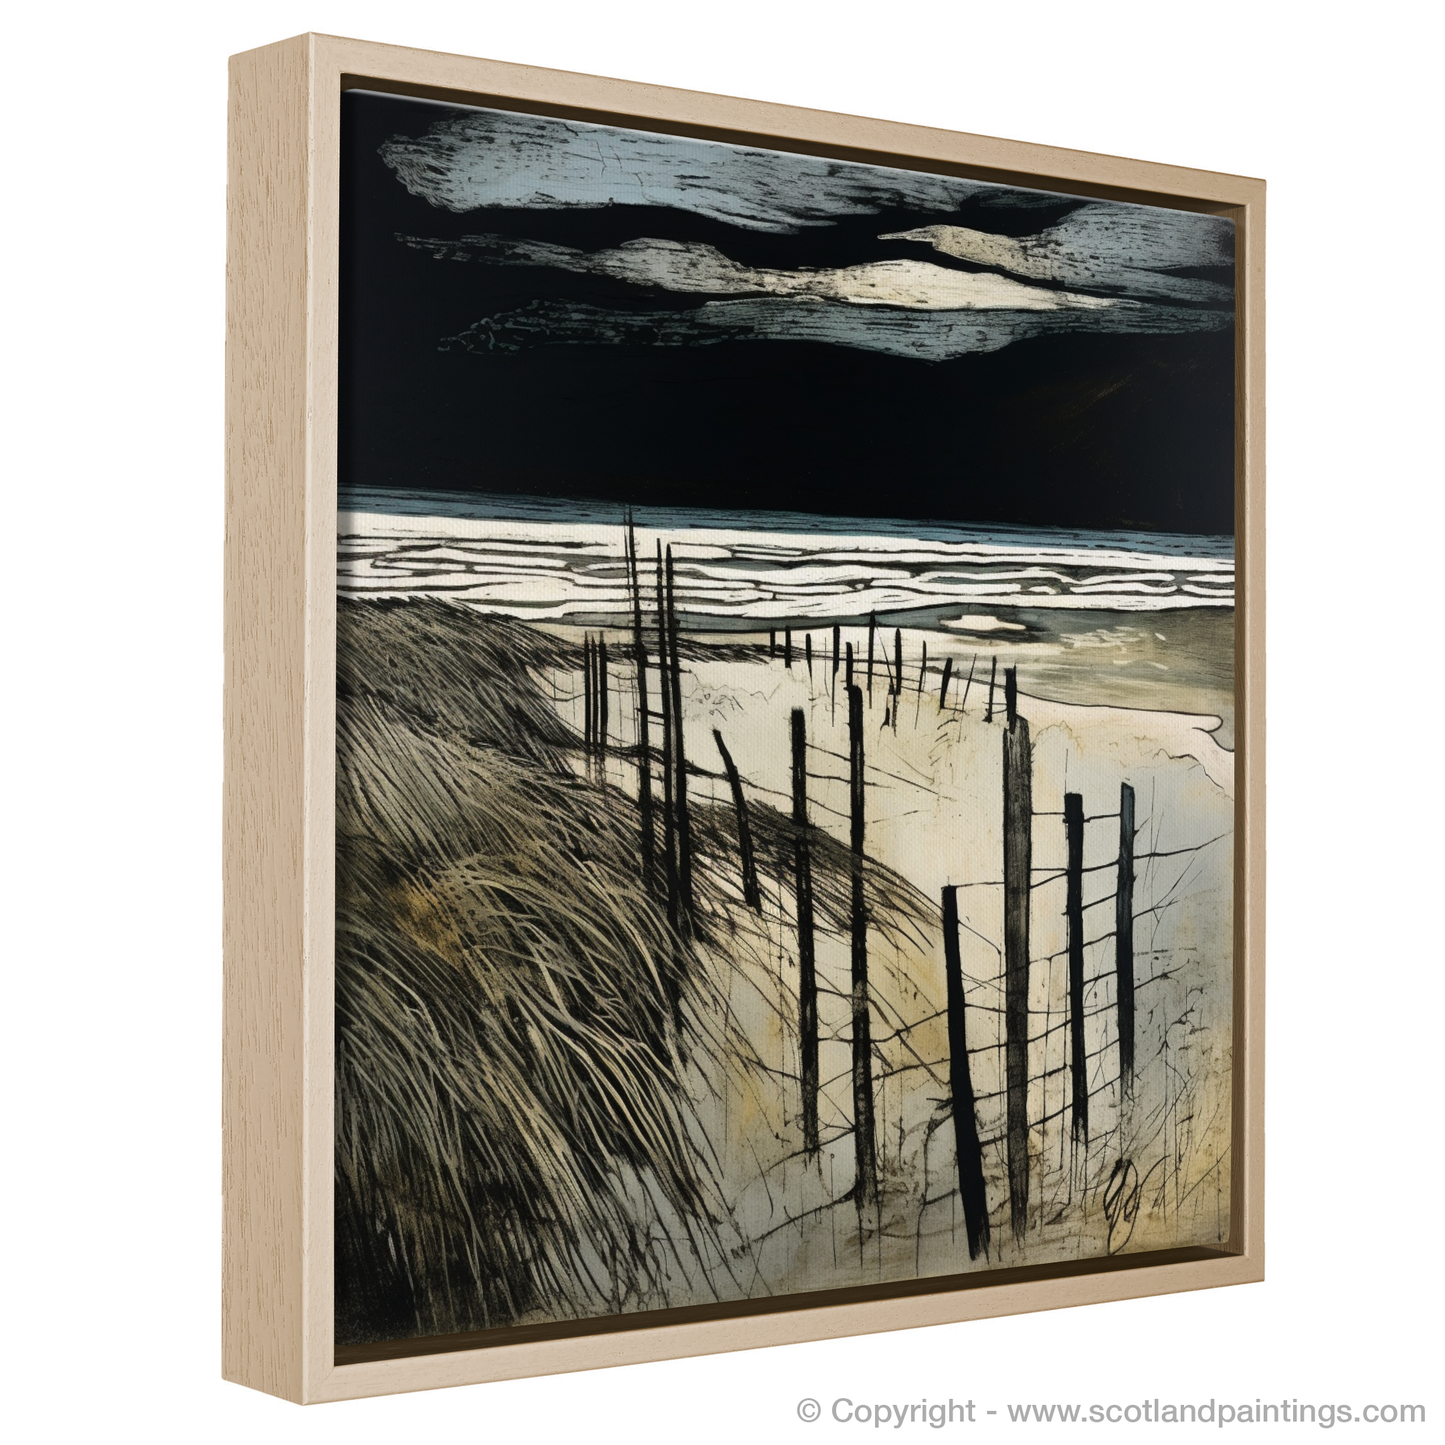 Painting and Art Print of West Sands with a stormy sky entitled "Stormy Serenade at West Sands".